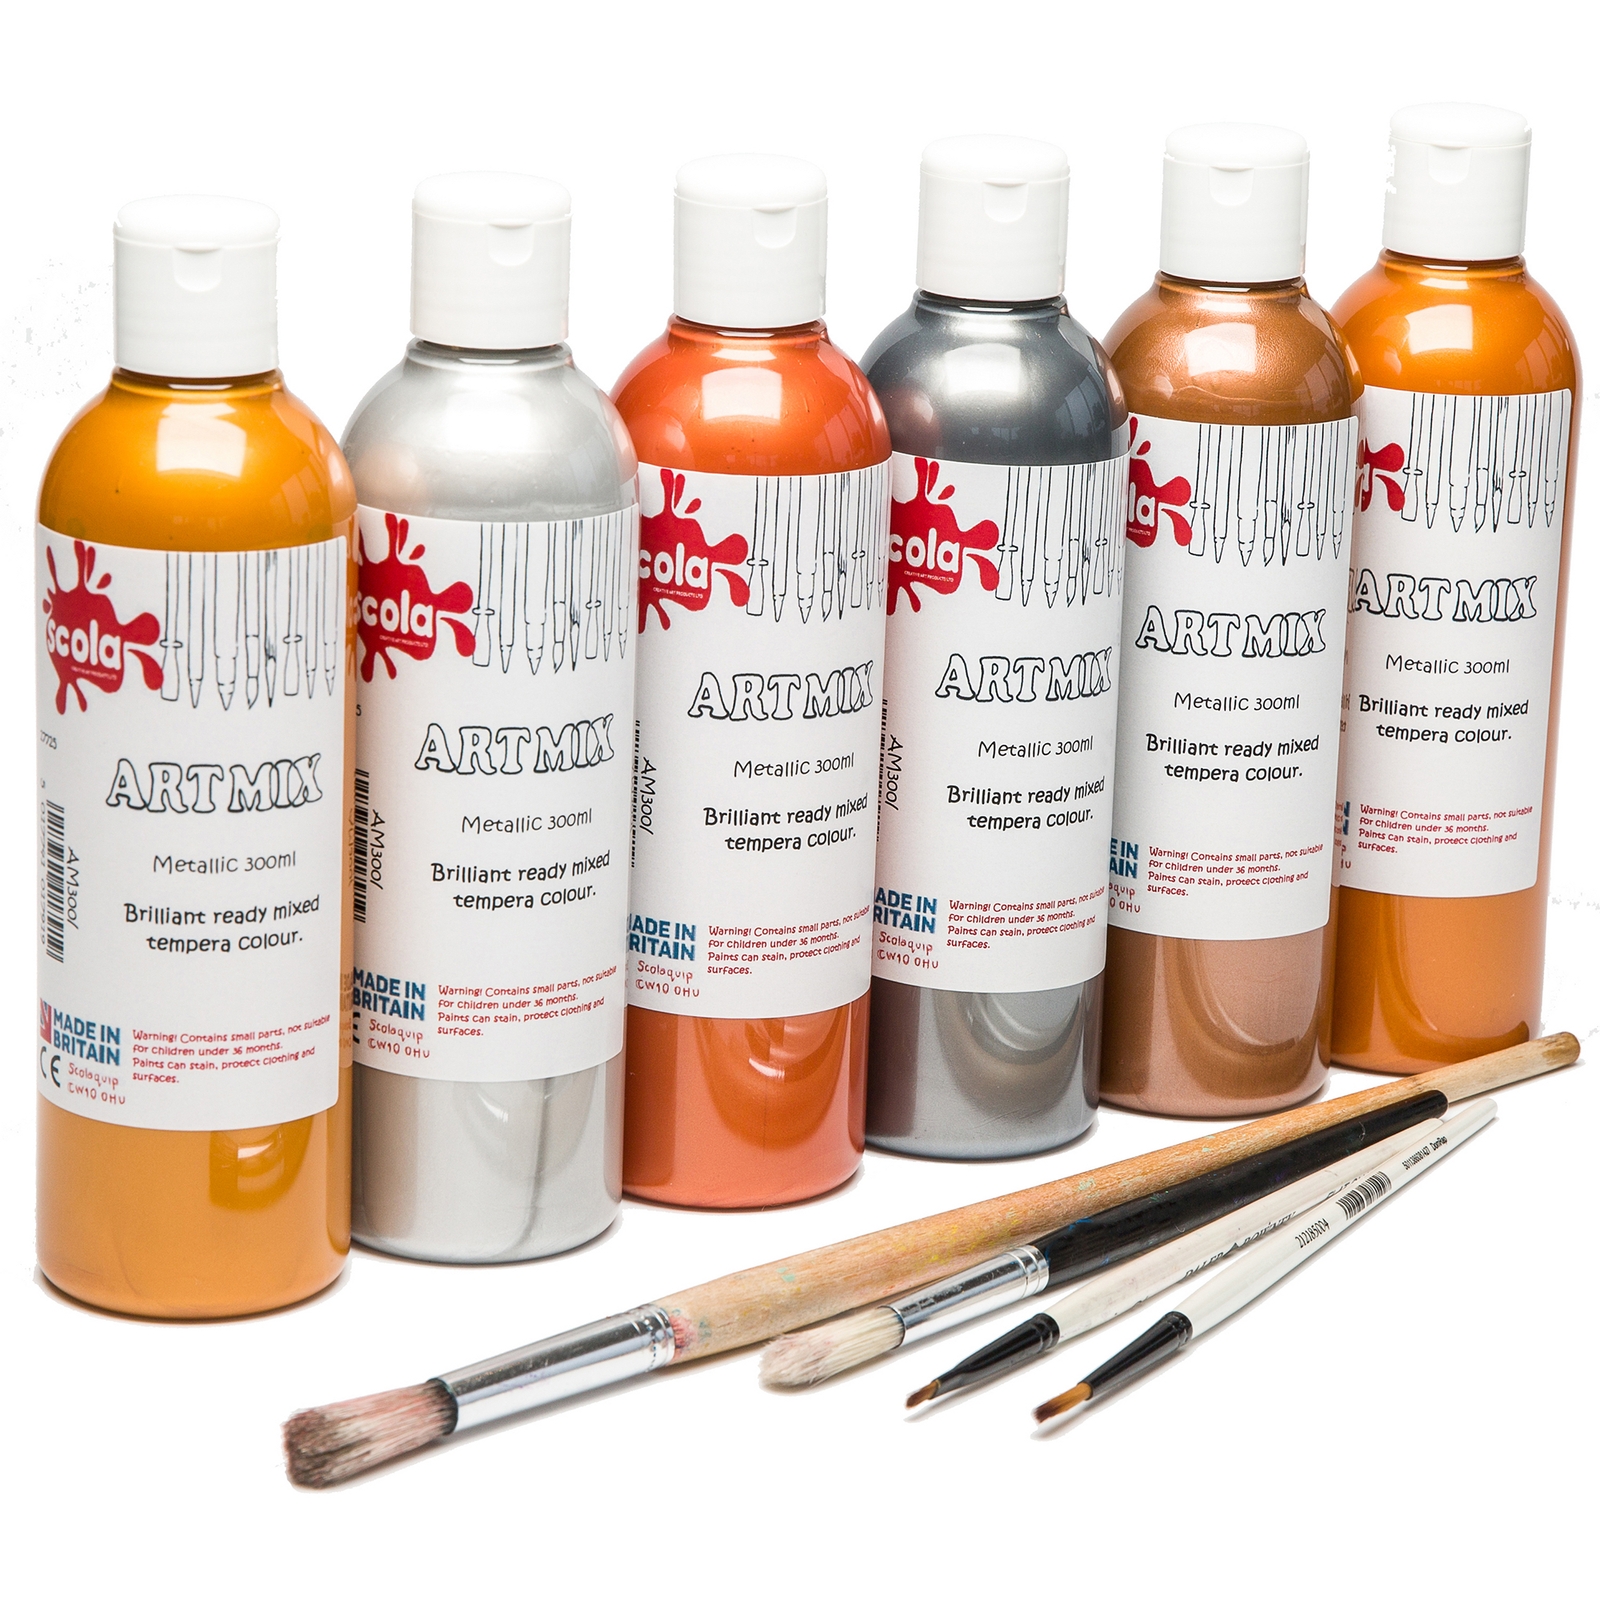 Scola Metallic Artmix Ready Mixed Paint - 300ml - Assorted - Pack of 6